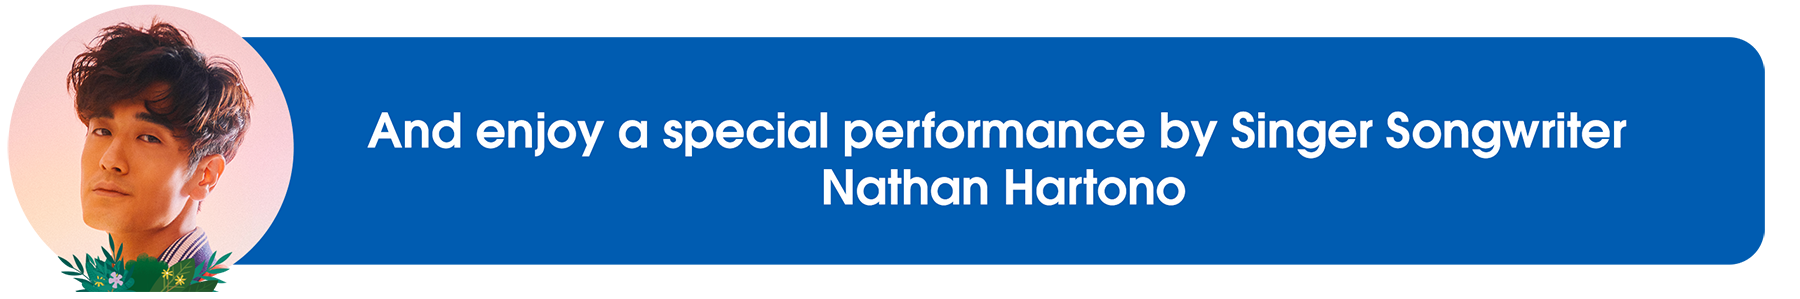 And enjoy a special performance by Nathan Hartono